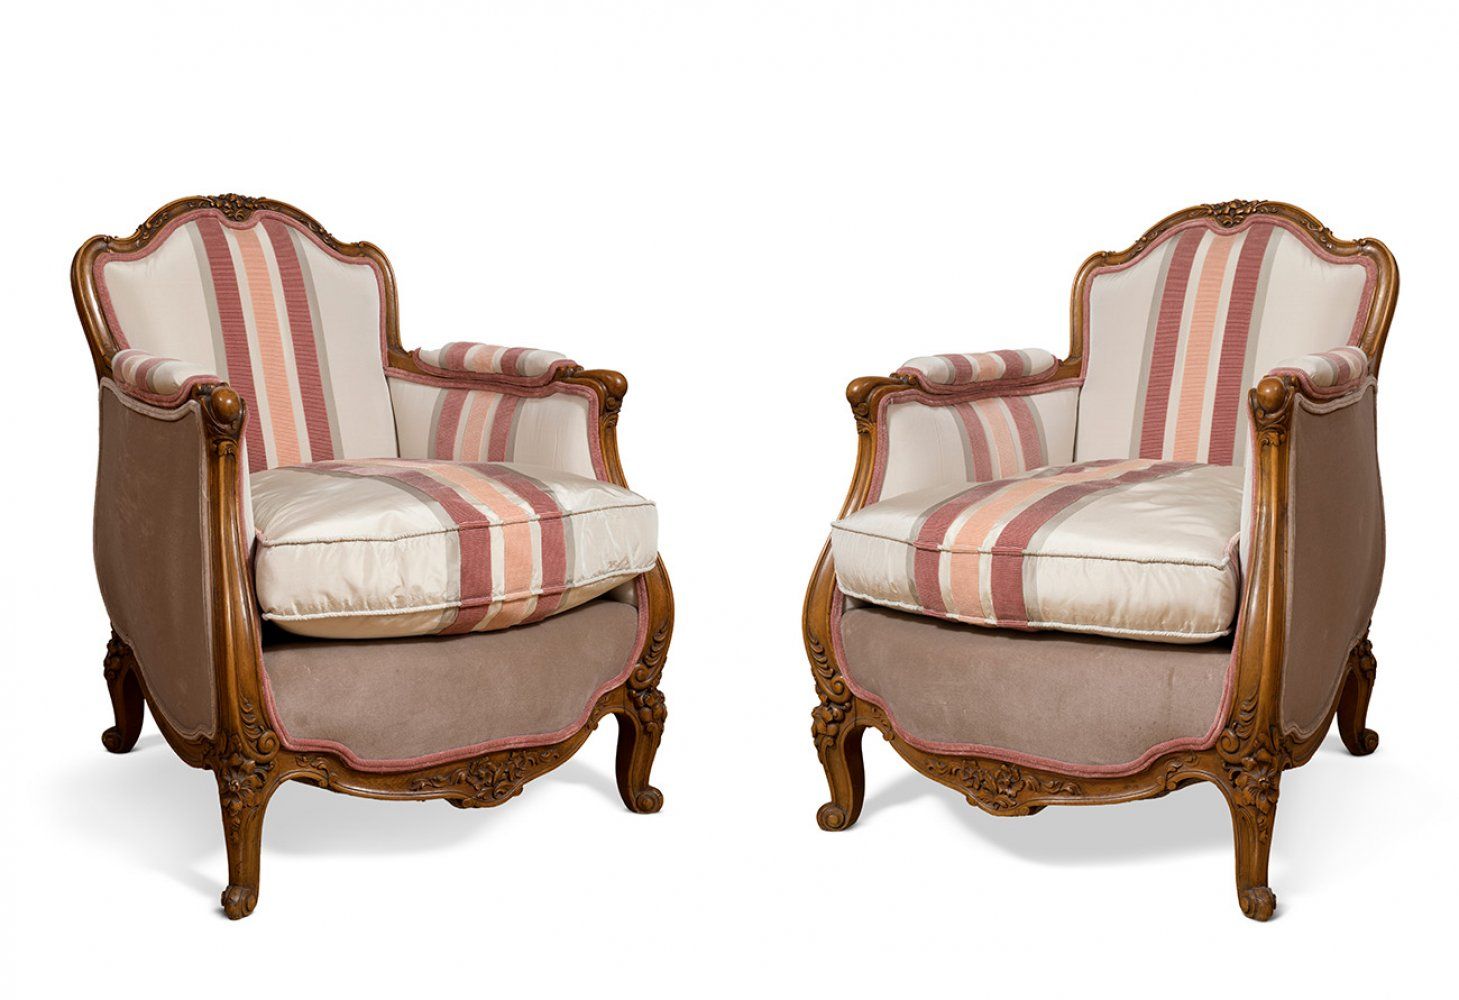 Pair of Bergère armchairs, Louis XV style; France, mid-20th century. Pair of Ber&hellip;